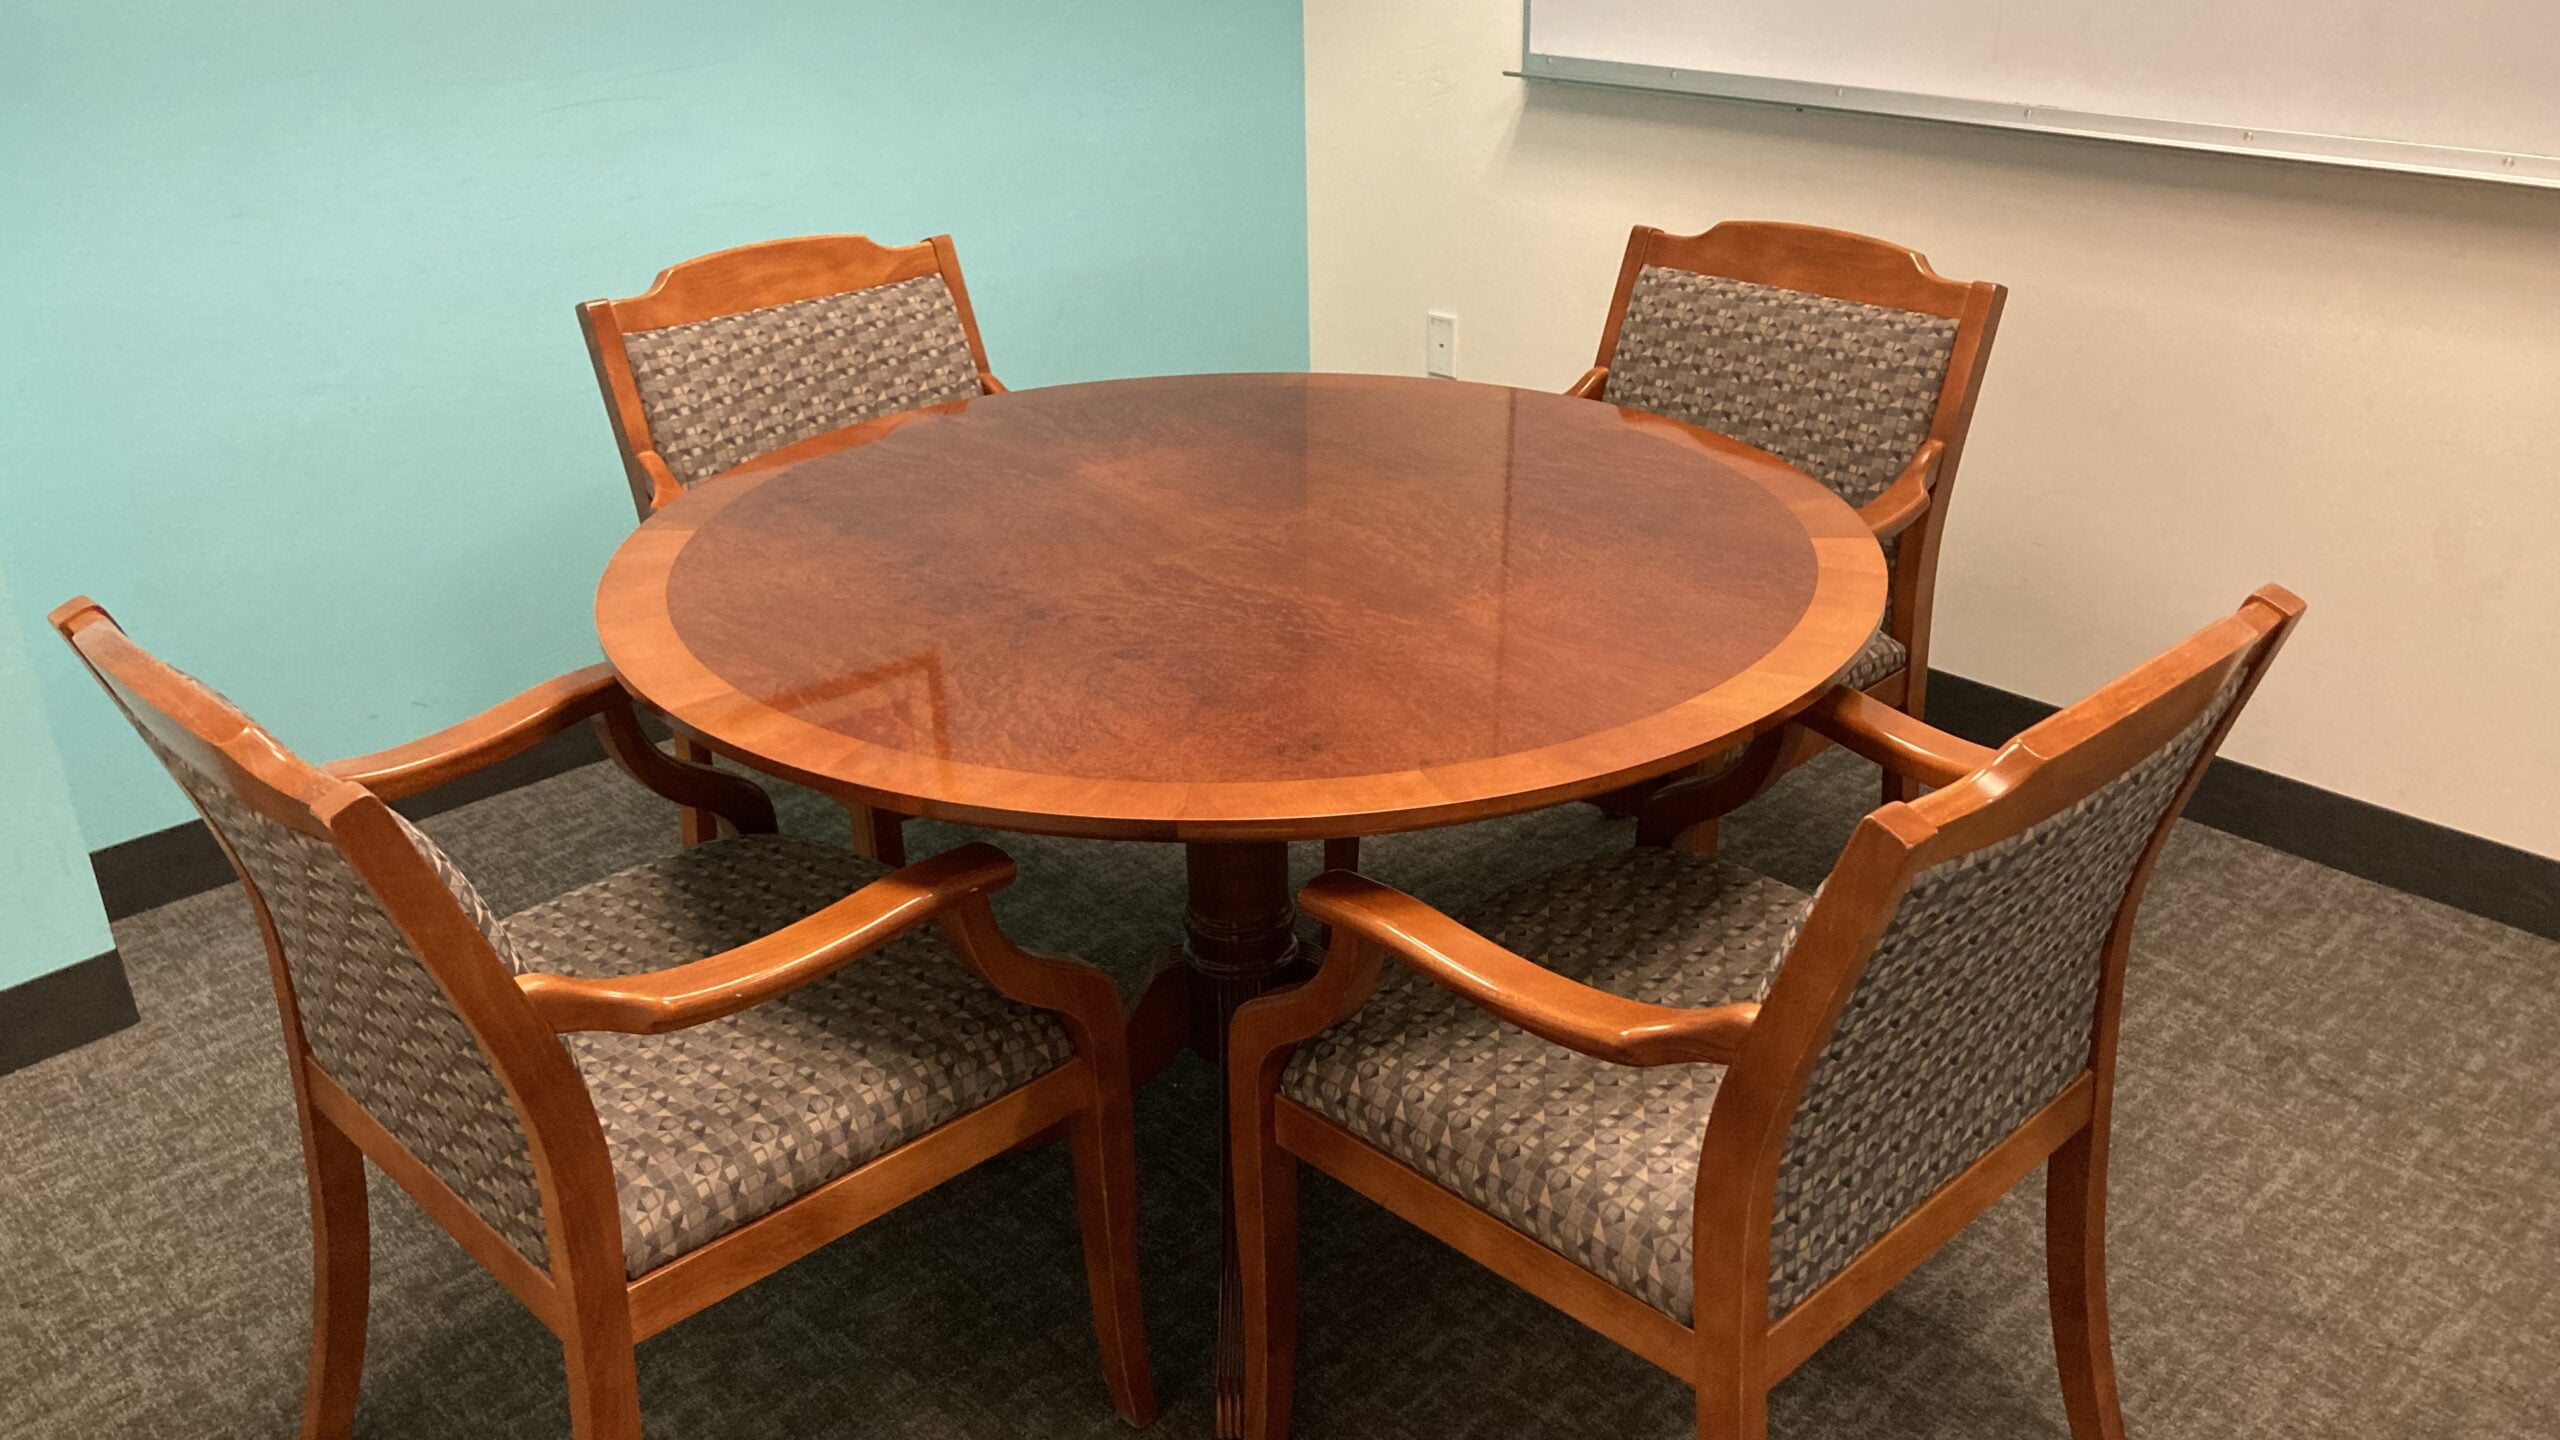 Nihoa private meeting room for rent by the hour at SURF Incubator in Downtown Seattle